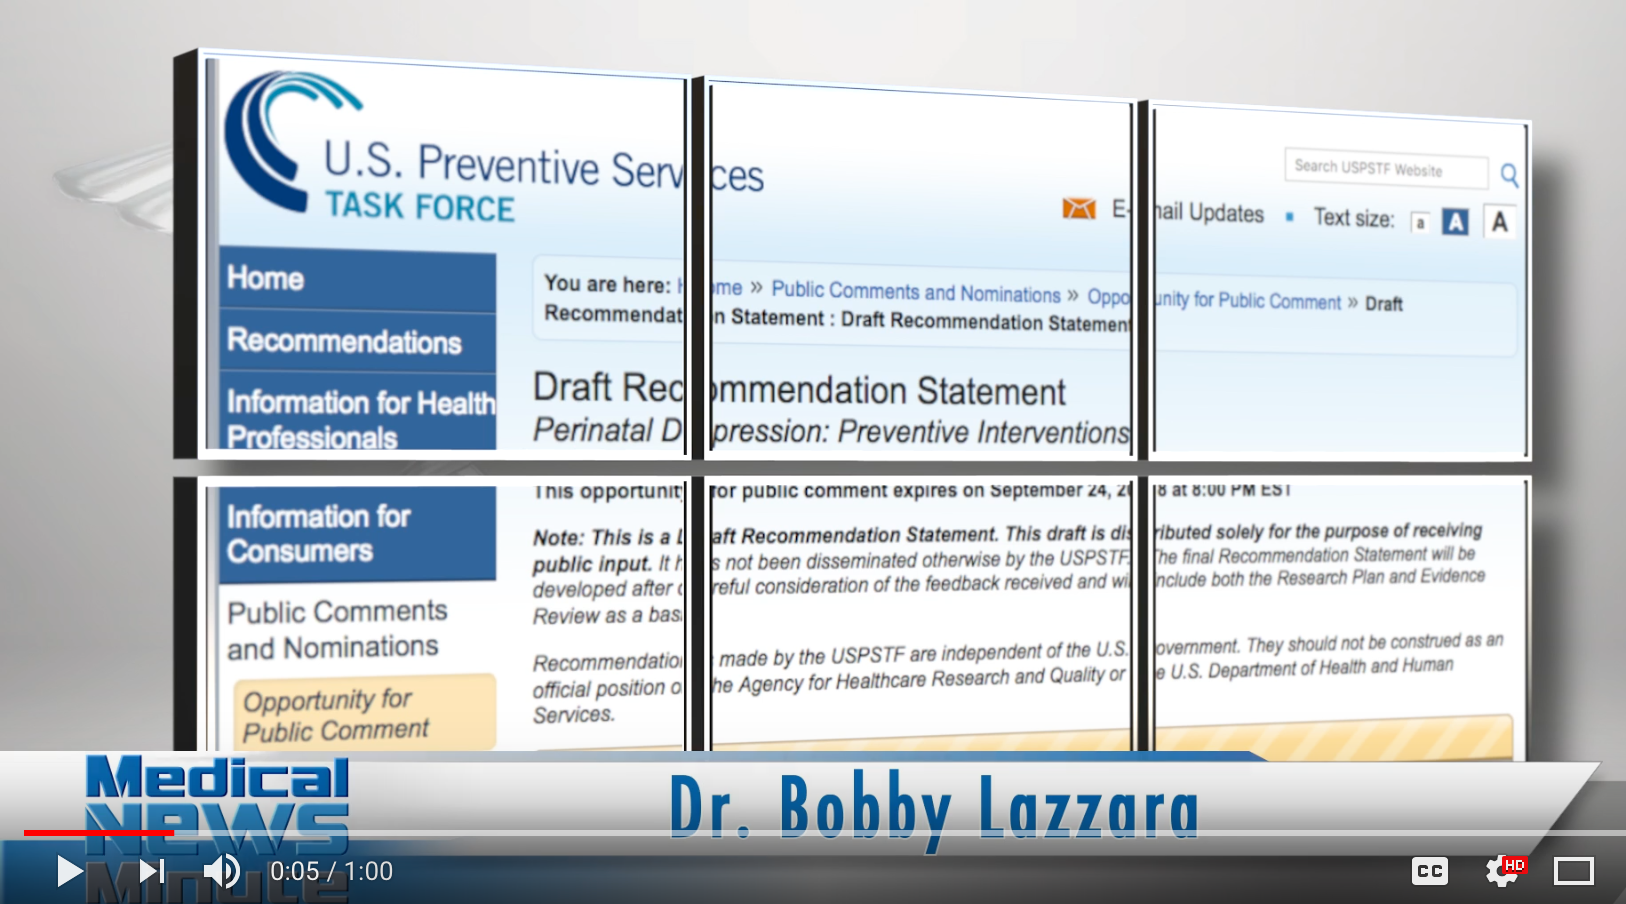 screenshot of video on USPSTF's recommendations on perinatal depression